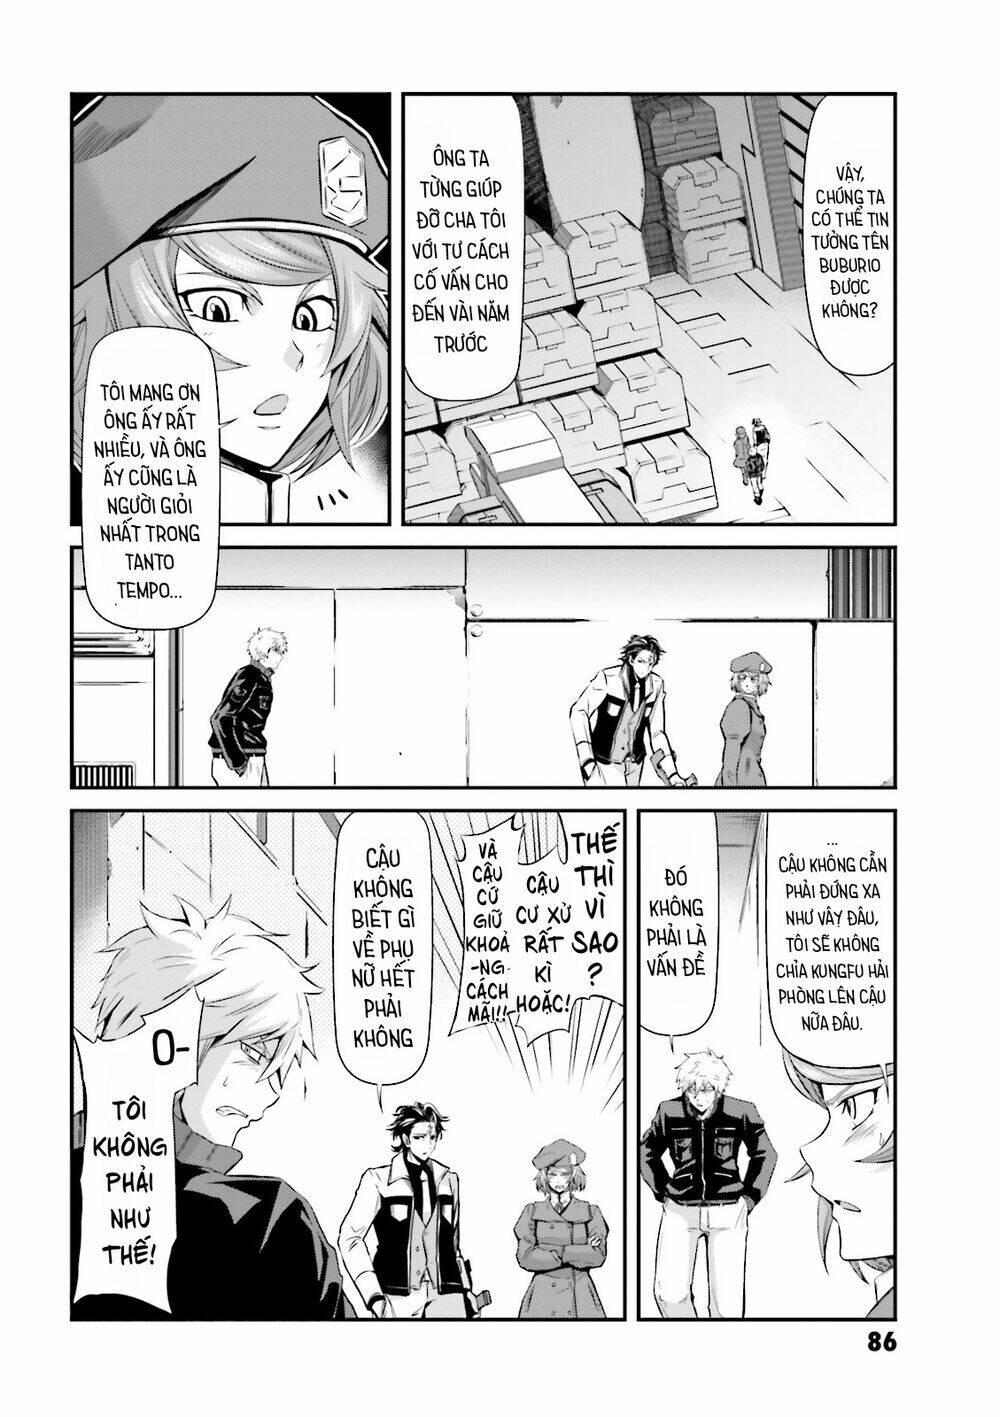 Mobile Suit Gundam Iron-Blooded Orphans Gekko: Chapter 3: 3 tháng không dịch